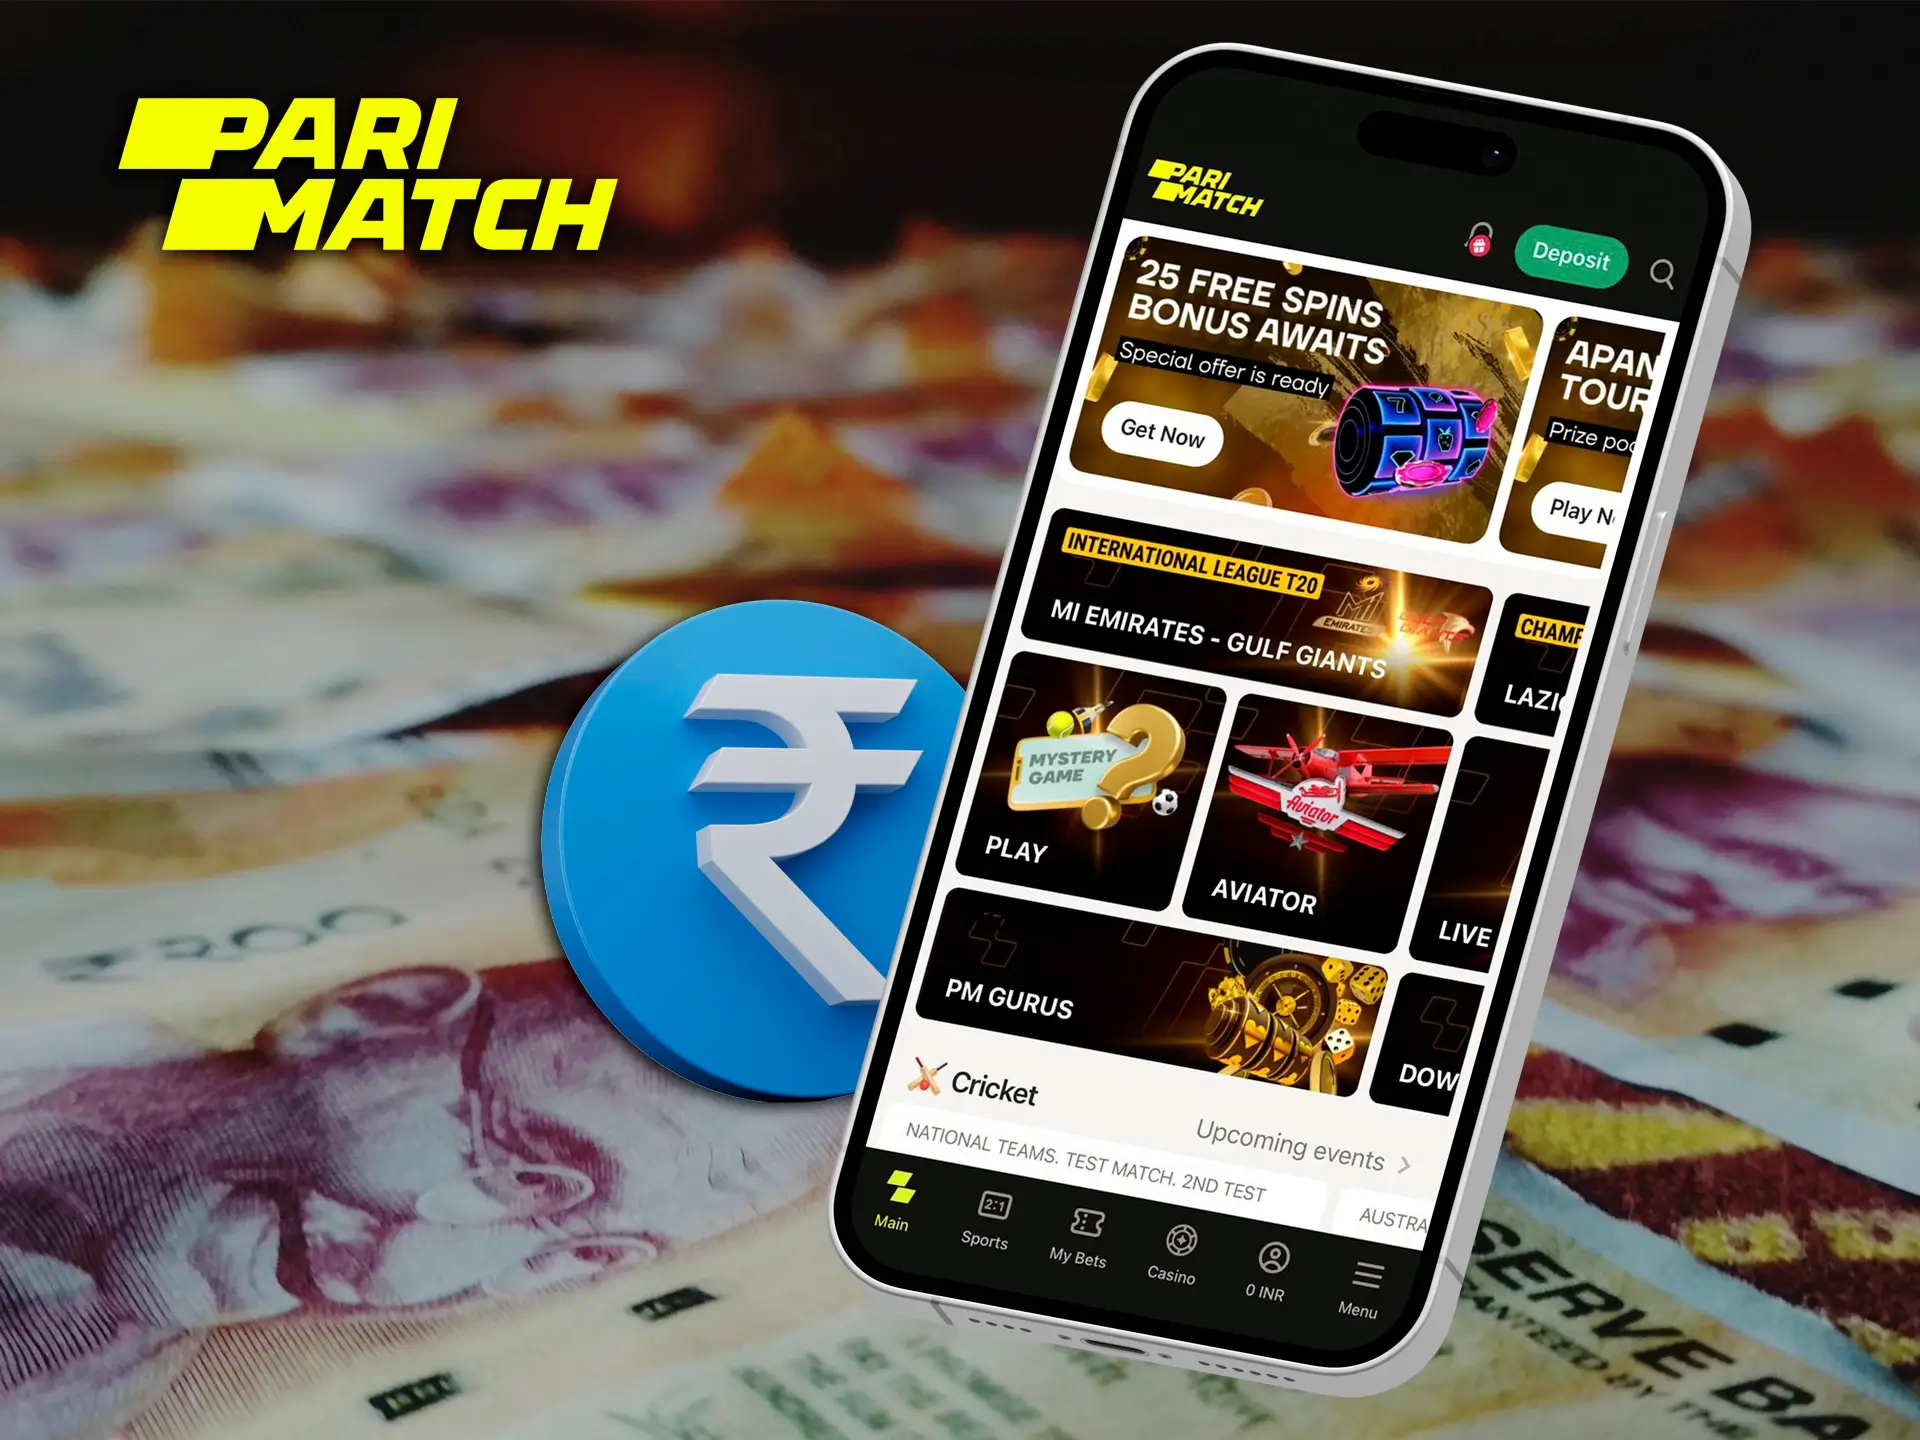 Enjoy fast withdrawals from Parimatch thanks to their user-friendly app.